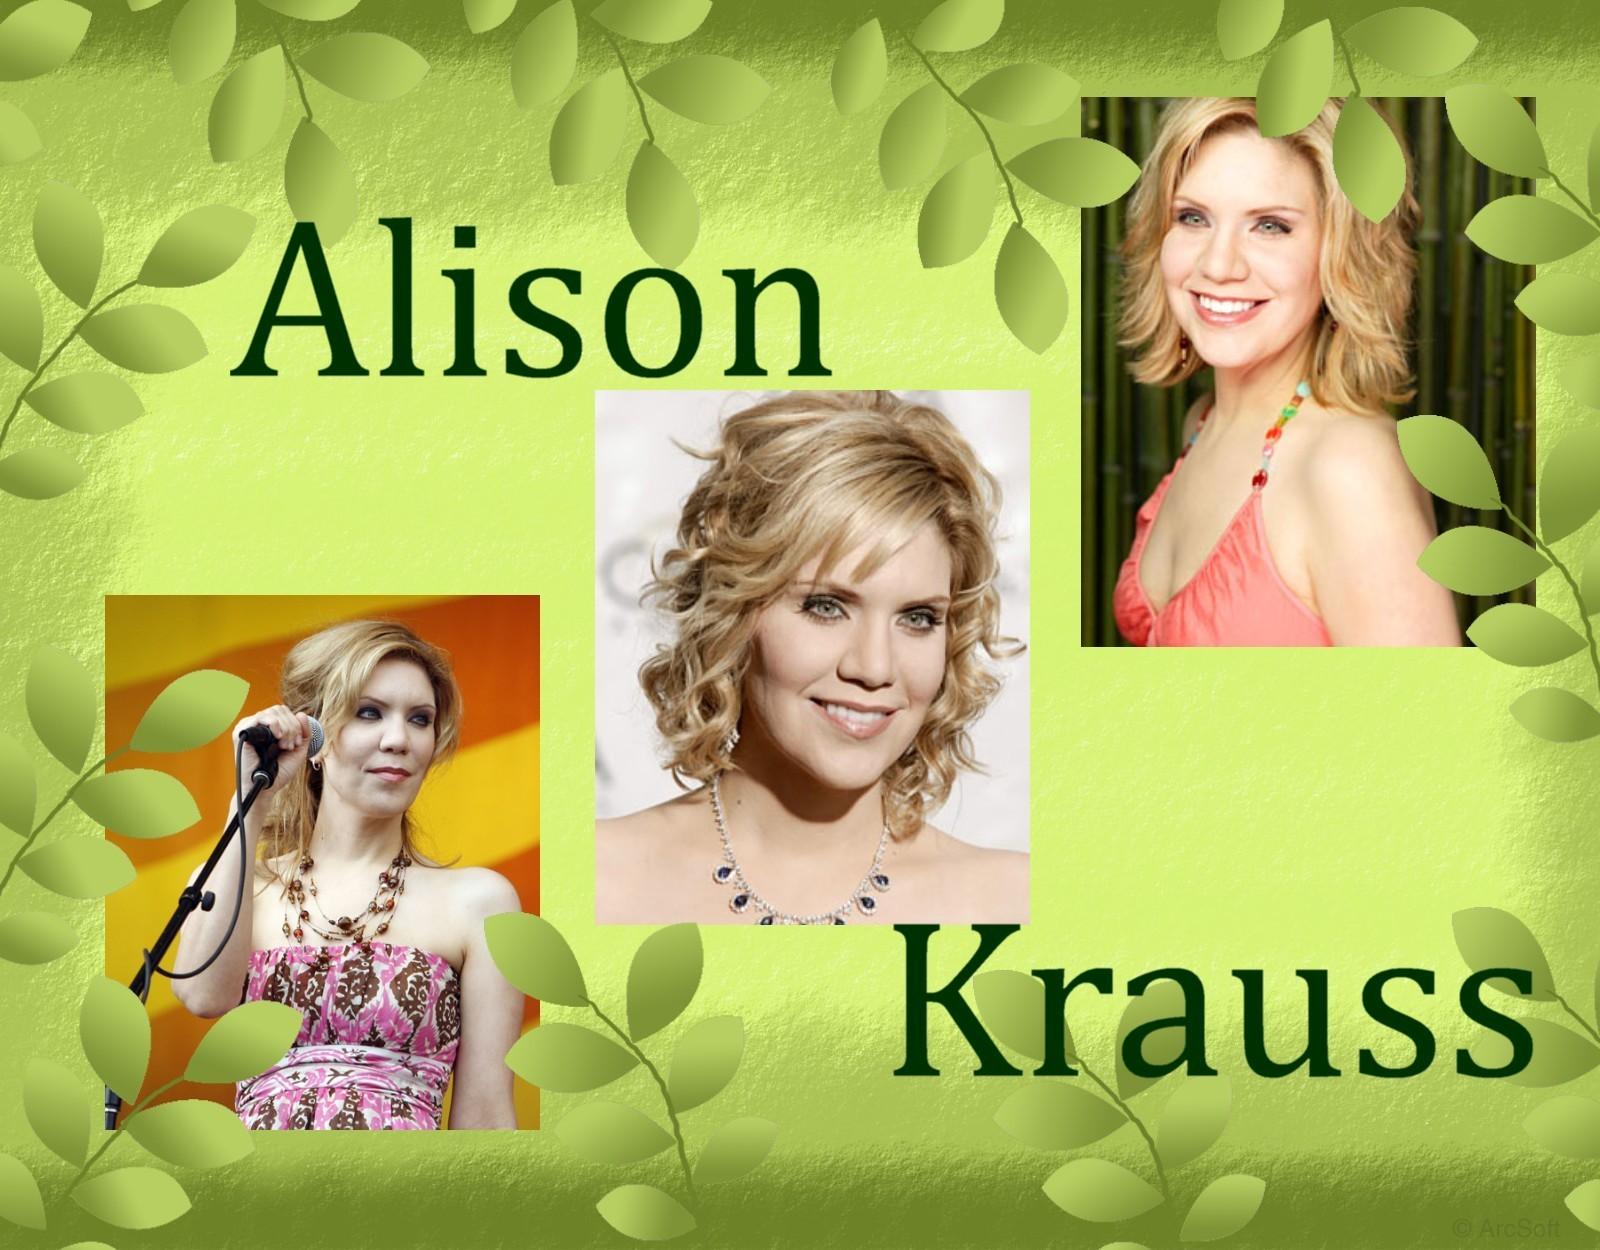 Alison Krauss image Alison Krauss HD wallpapers and backgrounds.